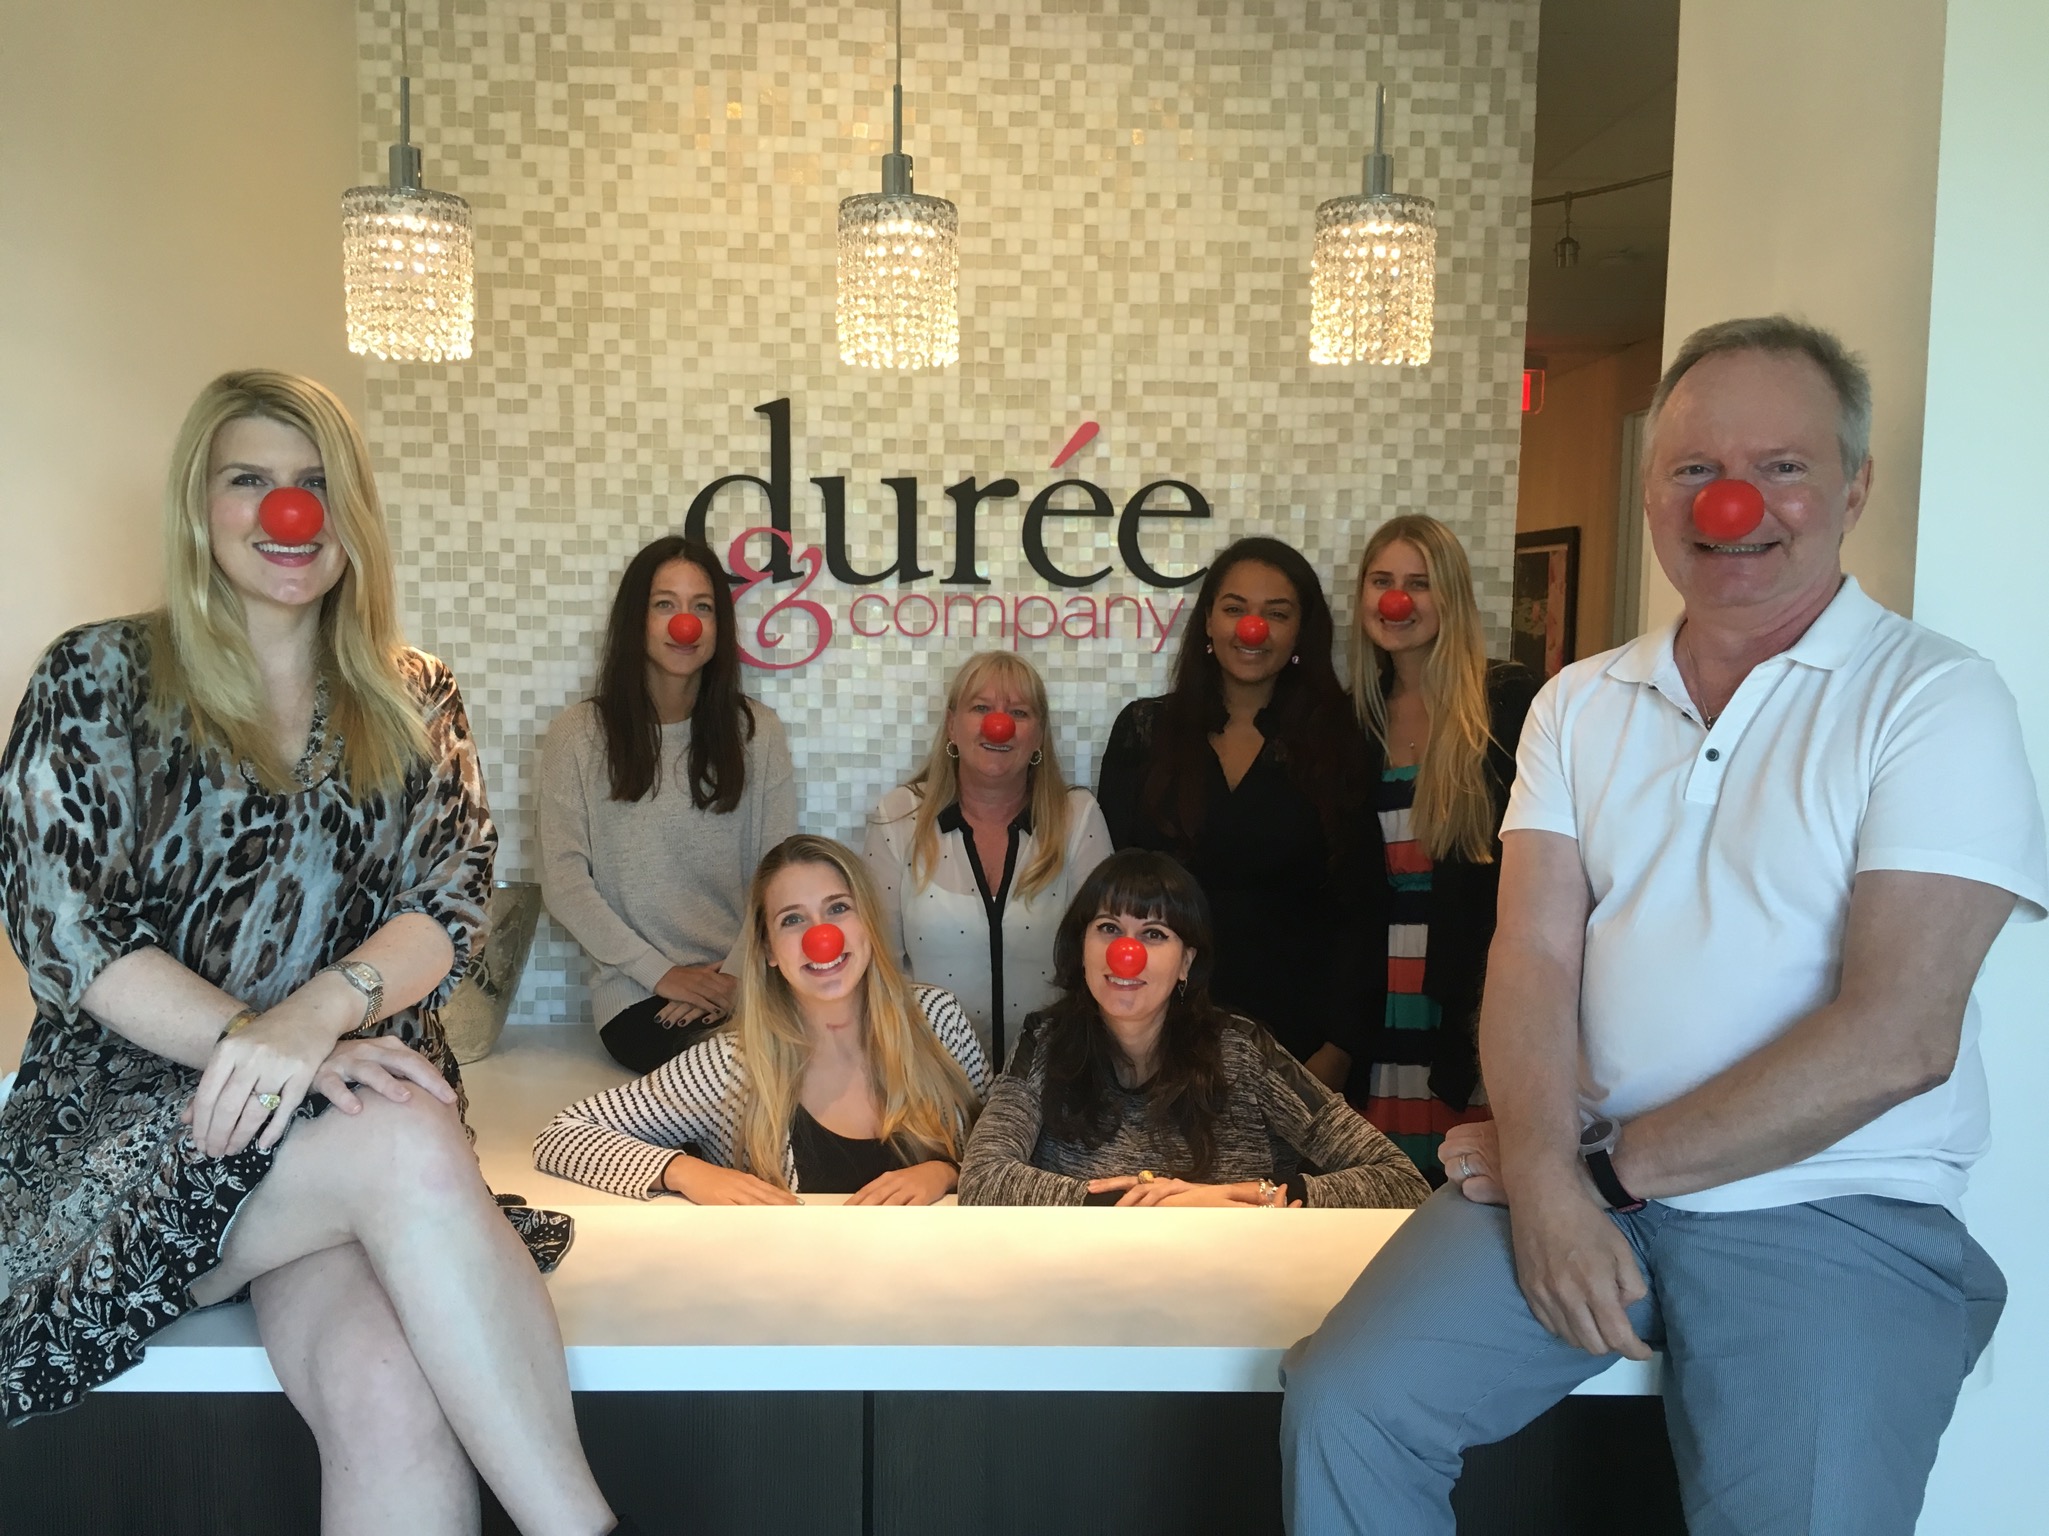 Red Nose Day Durée and Company